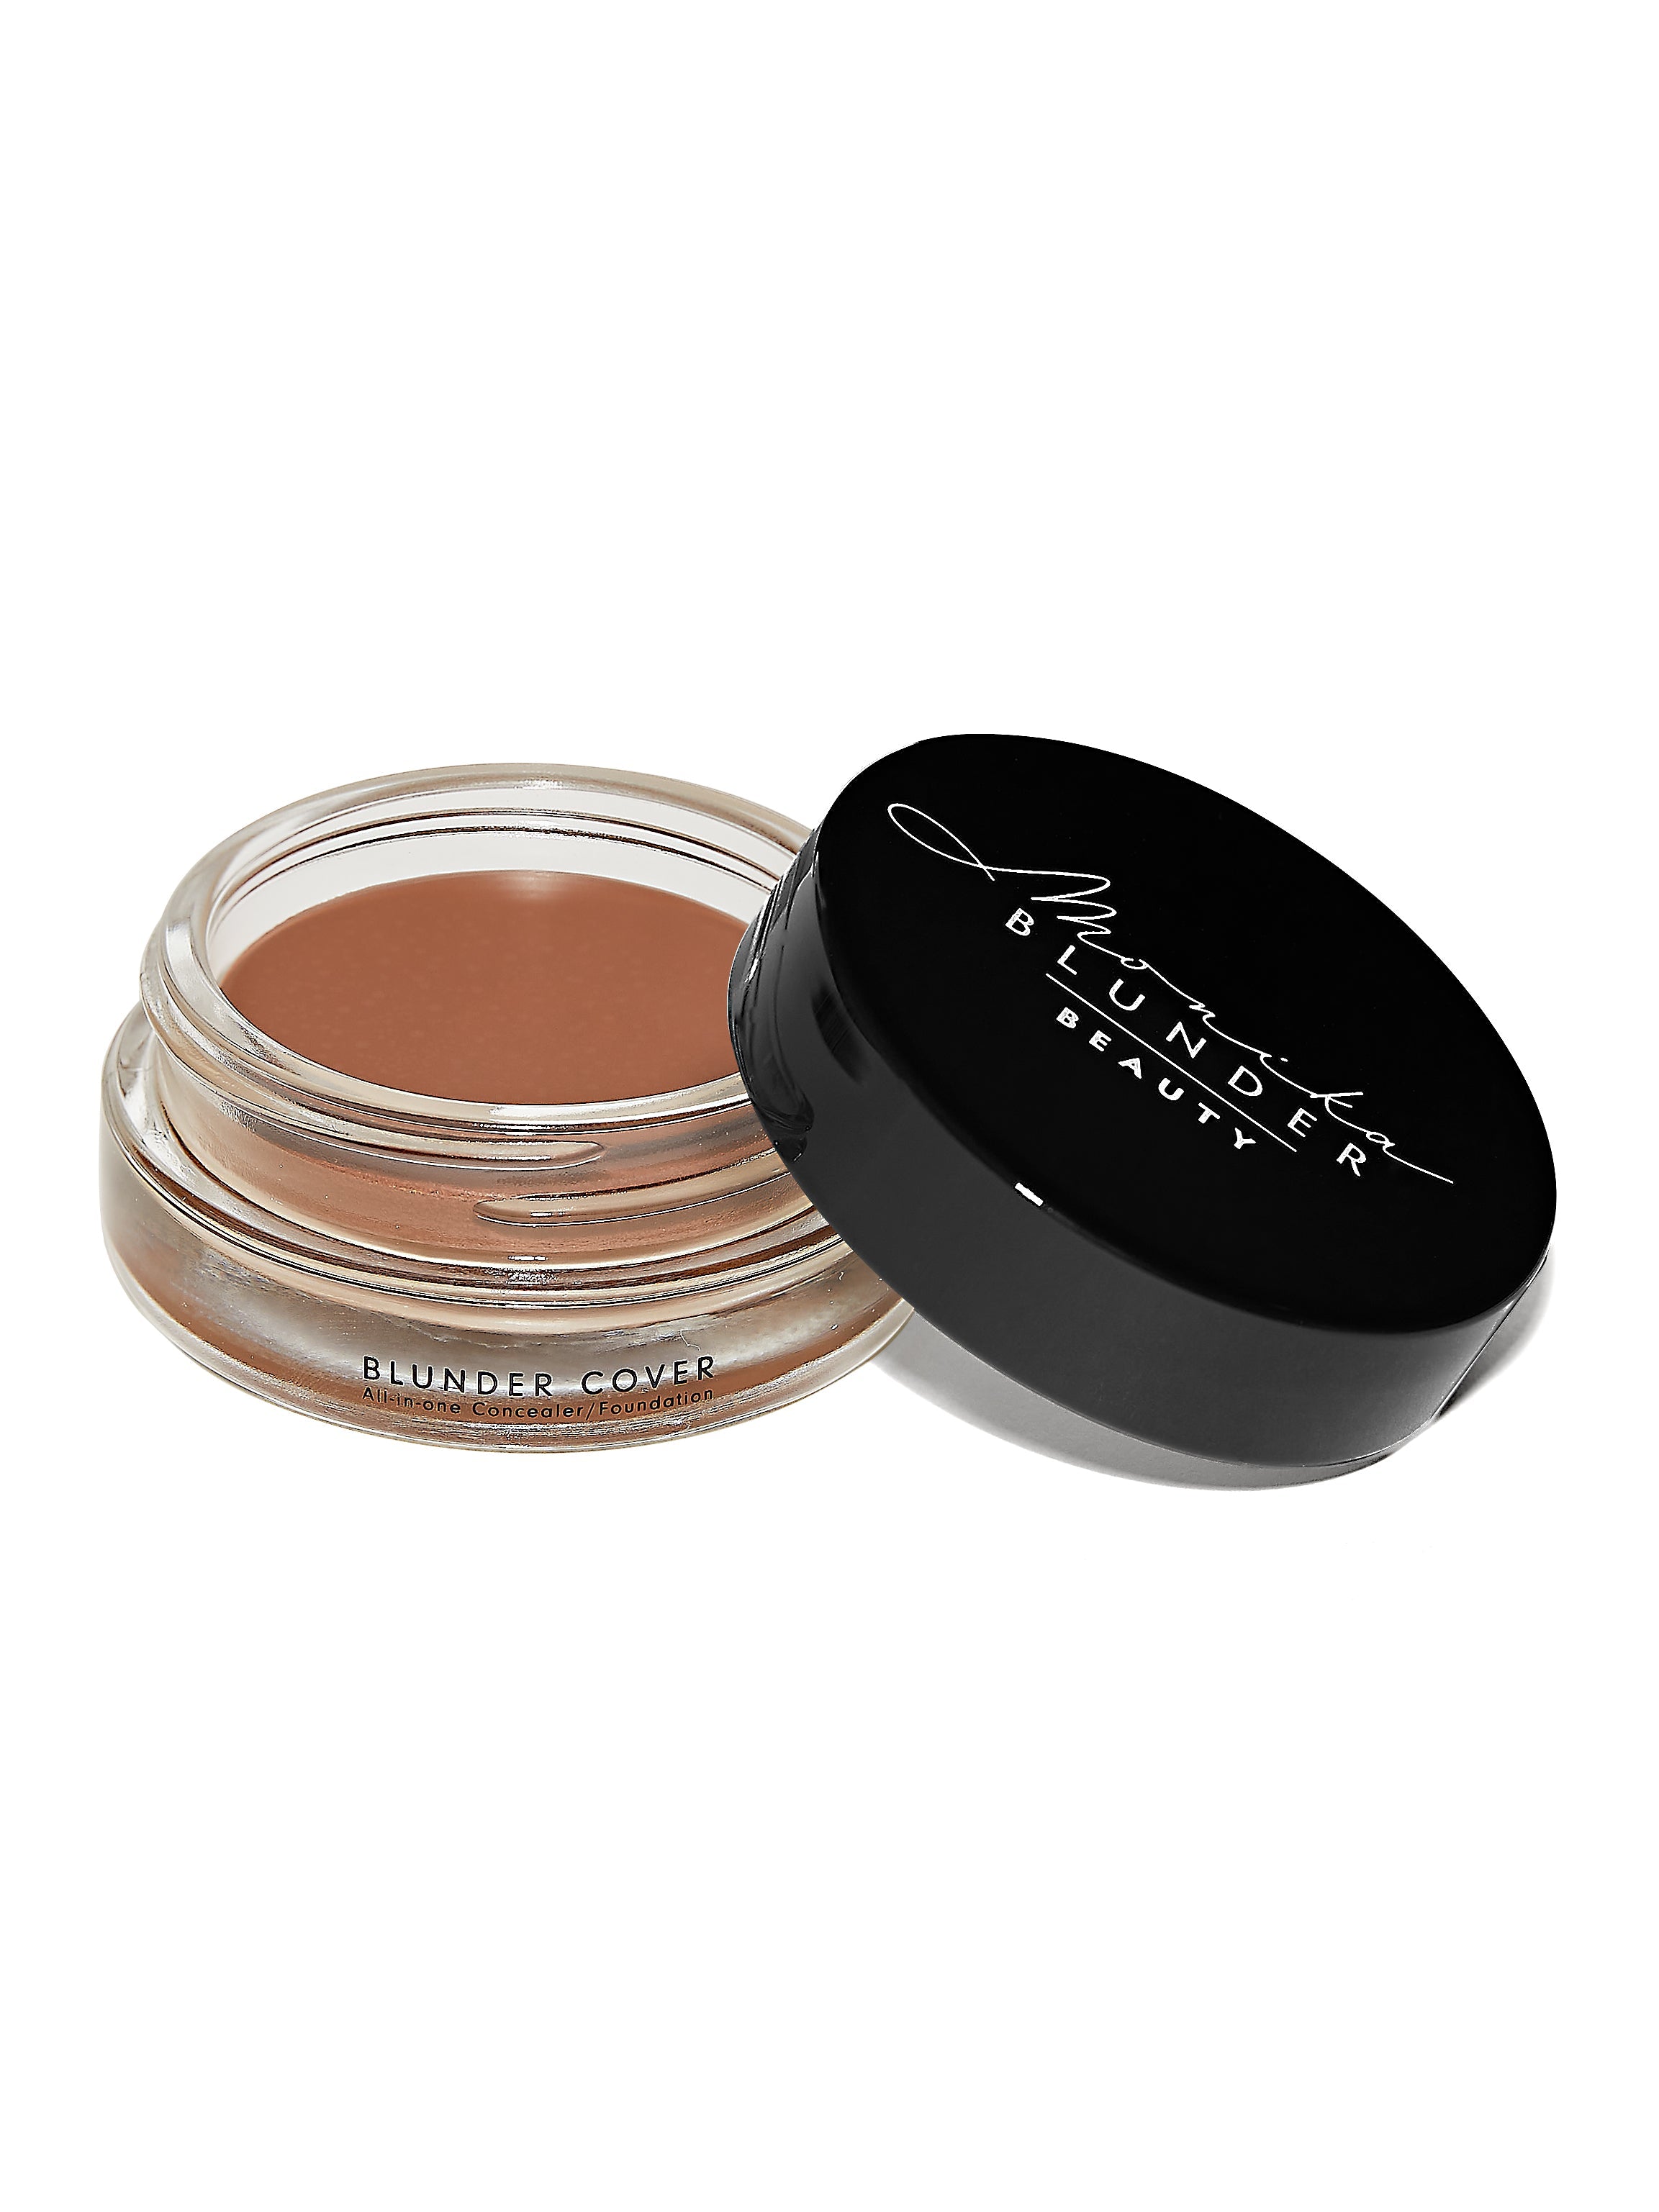 Blunder Cover an All-In-One Foundation/Concealer Shade - Sieben - 0